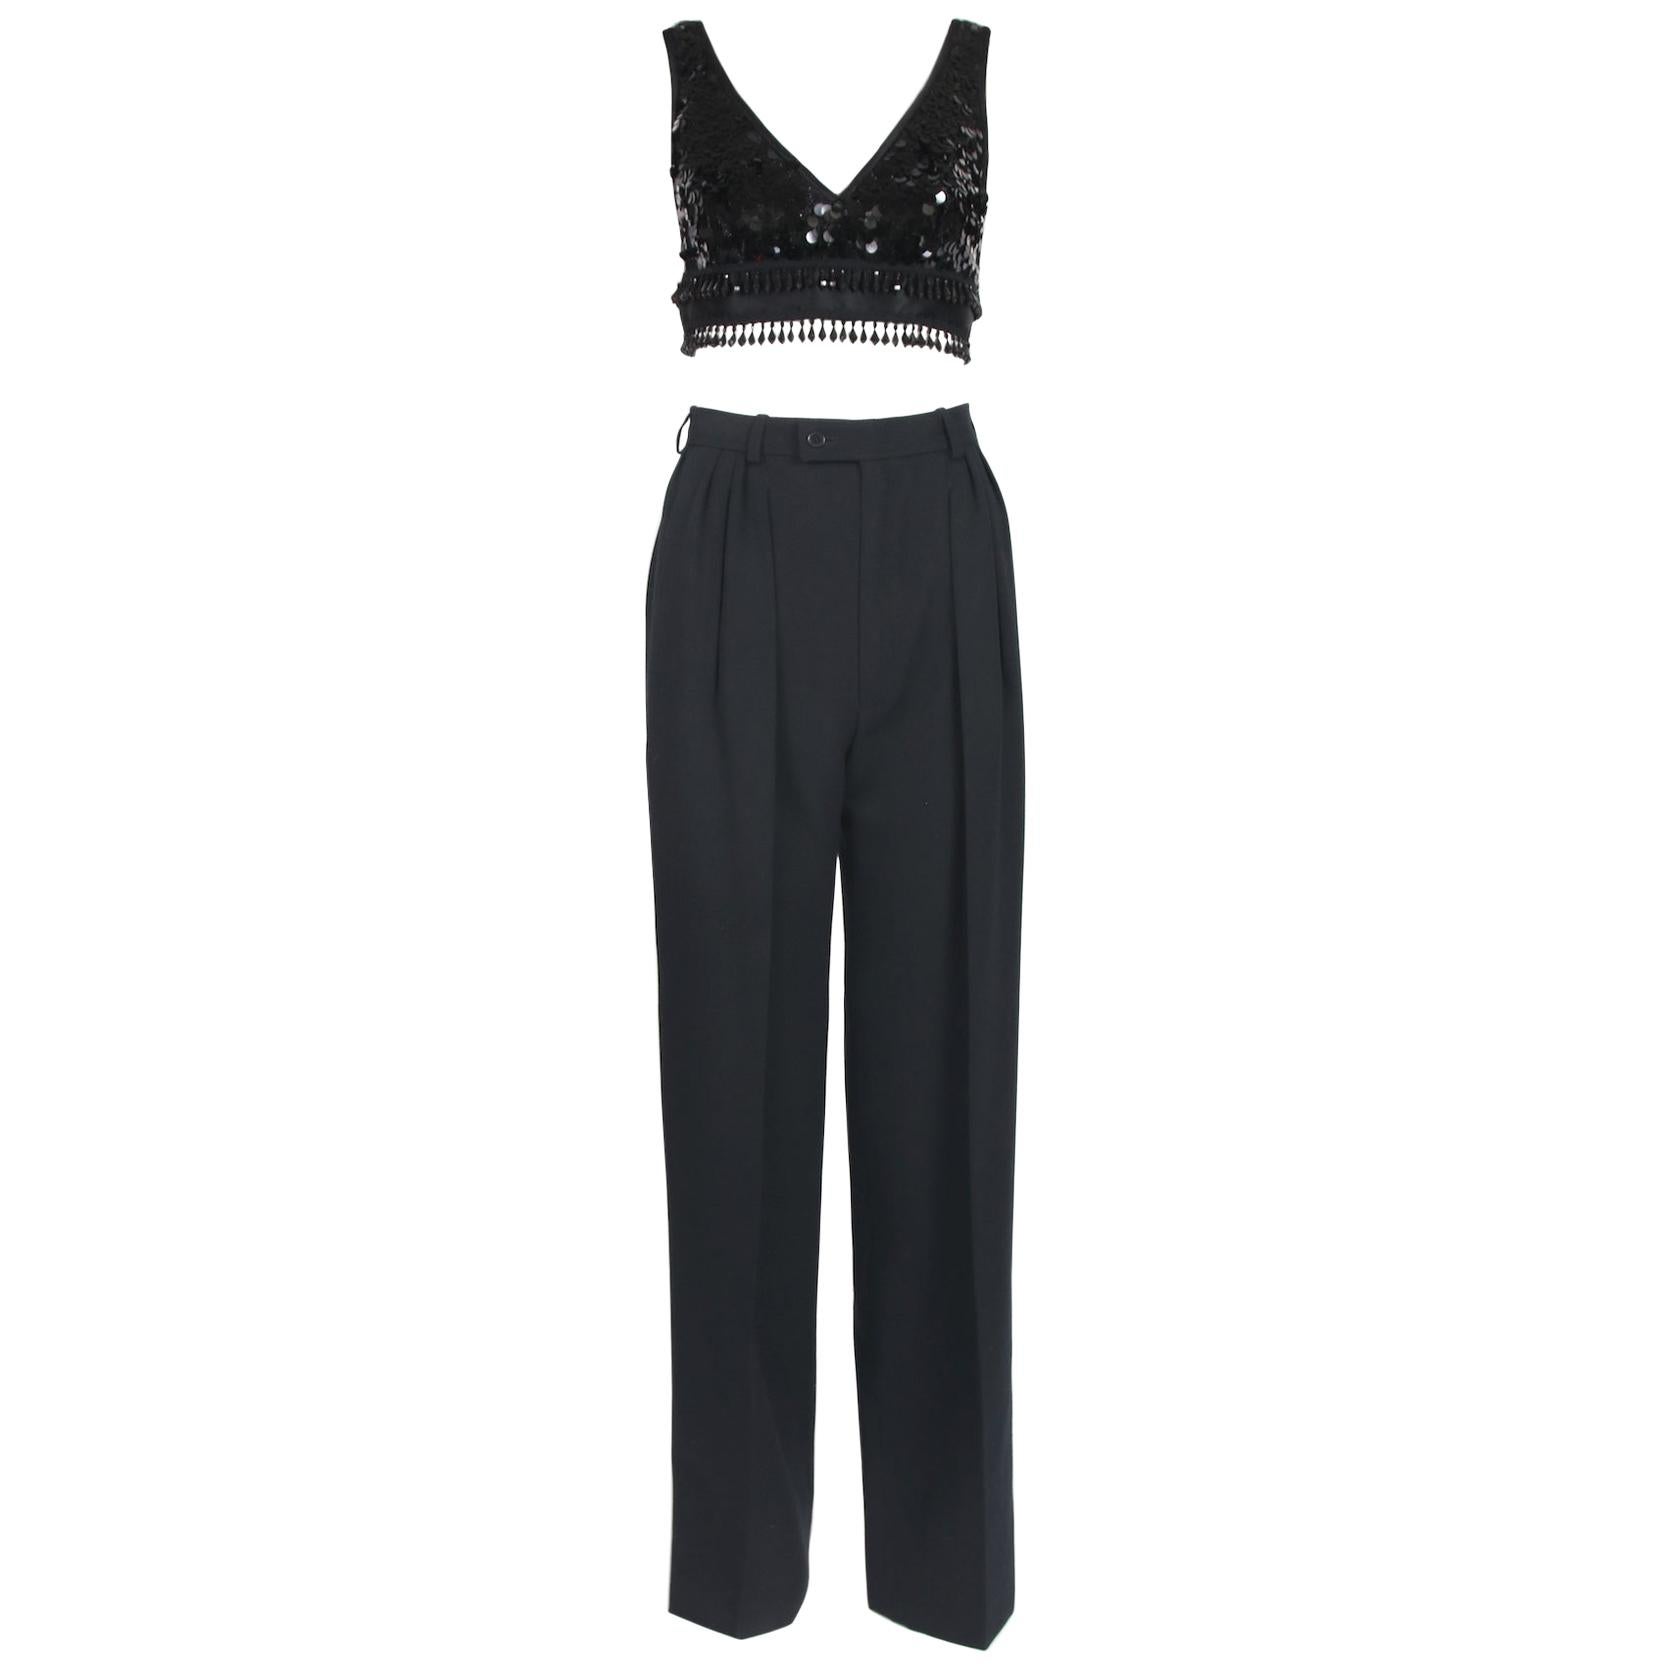 Yves Saint Laurent black smoking pants with sequin side stripe. There are several pleats at the front and back as well as two hidden side slash pockets. Size tag 38. There is no fabric tag but they feel like a wool gabardine. In excellent